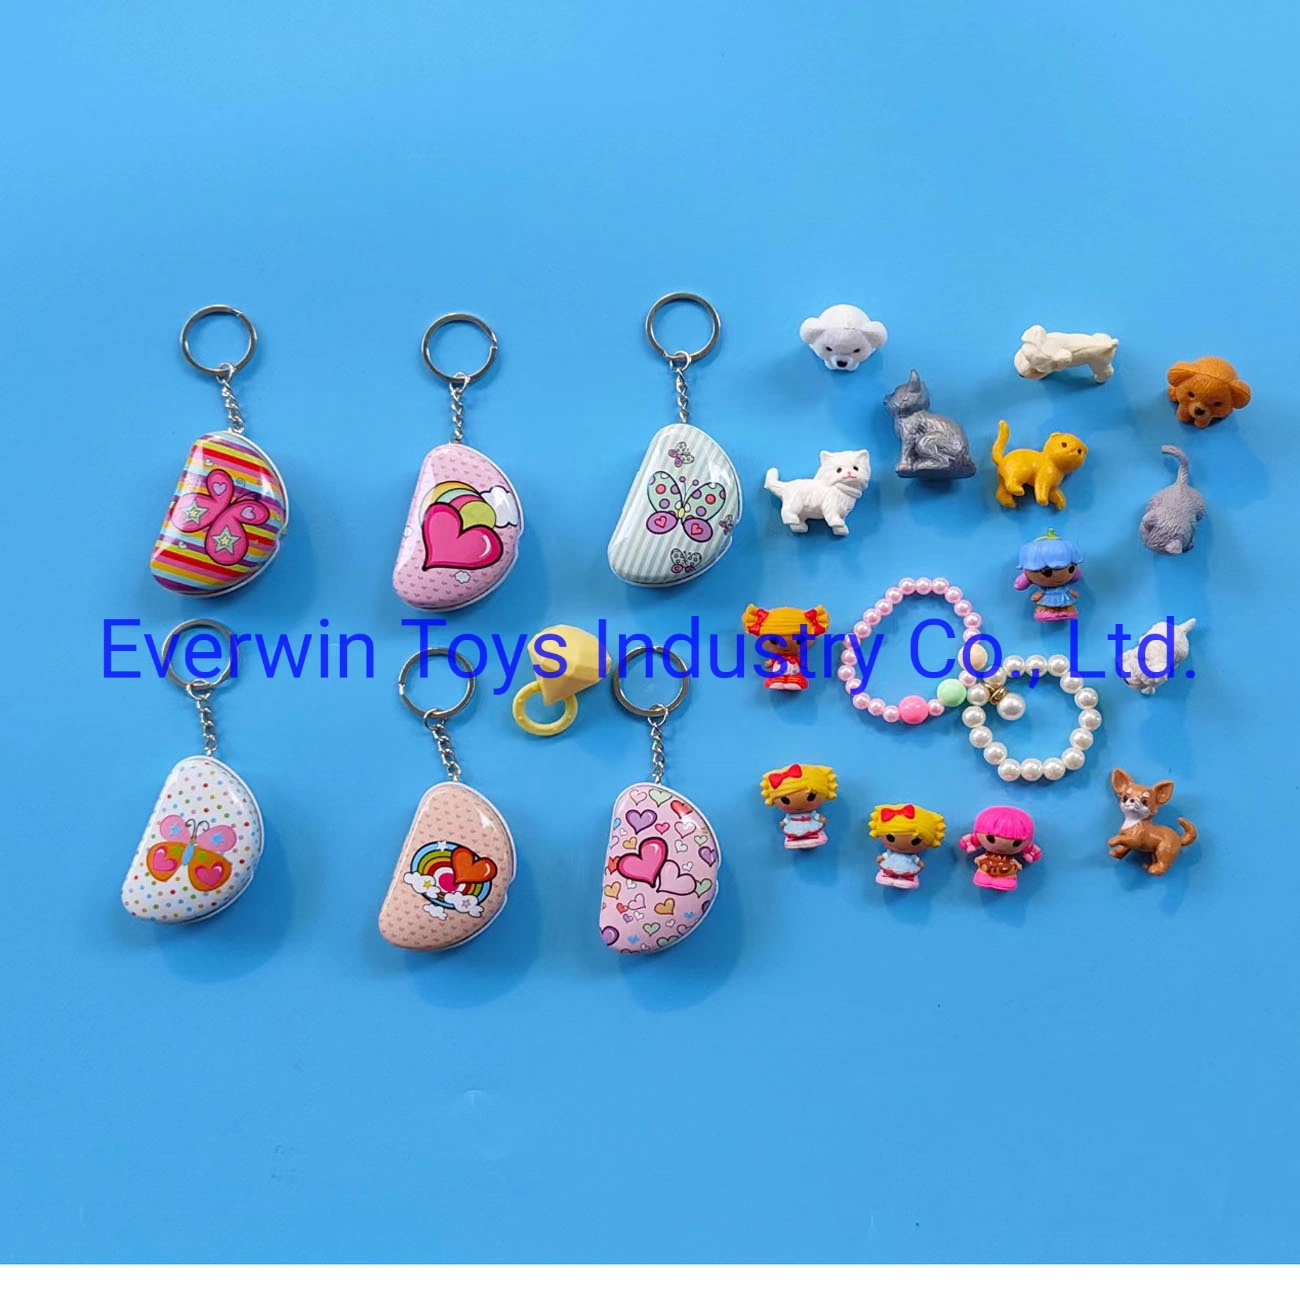 Blind Box Gifts Metal Can with Small Toys Inside Keychain Decoration Surprise Toys